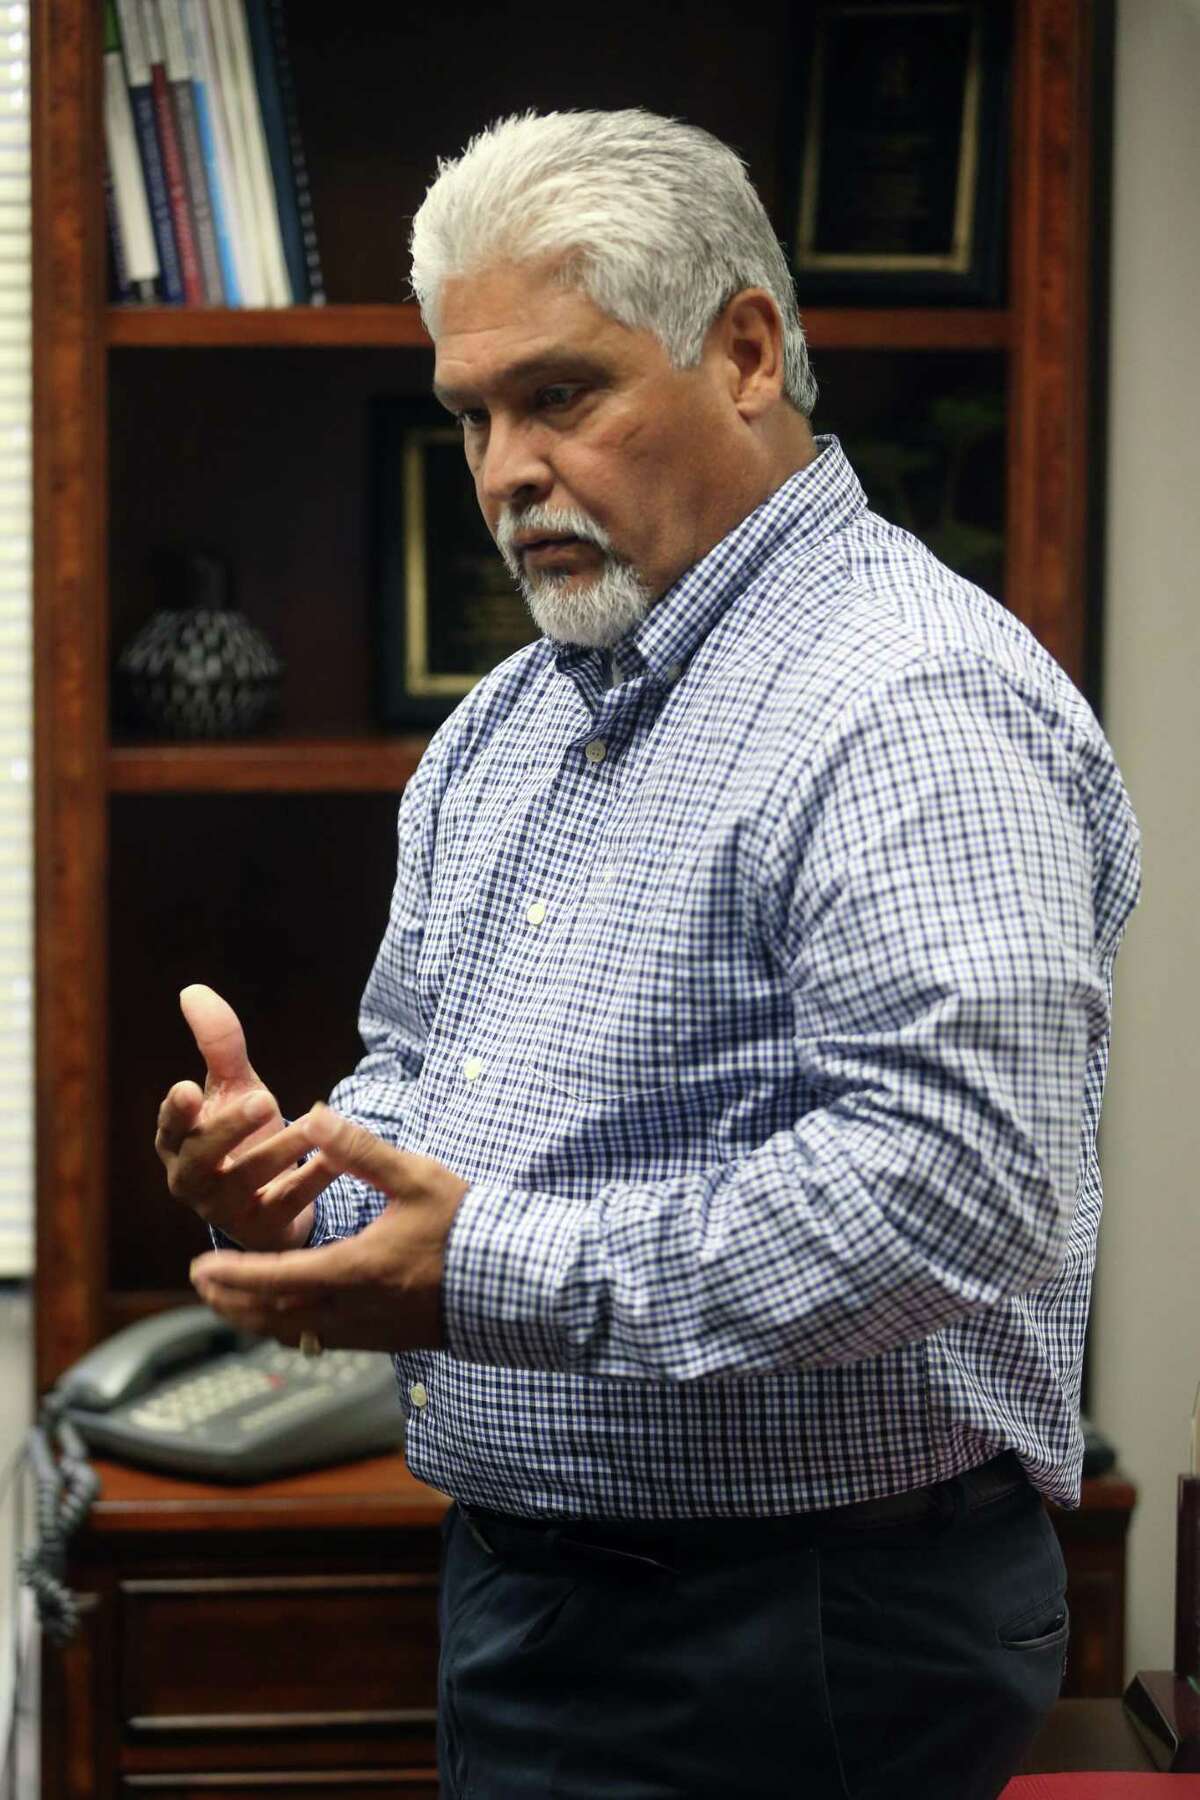 John Moran, Bexar County juvenile probation gang supervision program supervisor, talks Tuesday, July 2, 2019 about the specialty court docket aimed at juvenile gang members the probation department is working with Judge Carlos Quezada, presiding judge of the 289th Juvenile District Court, to start.